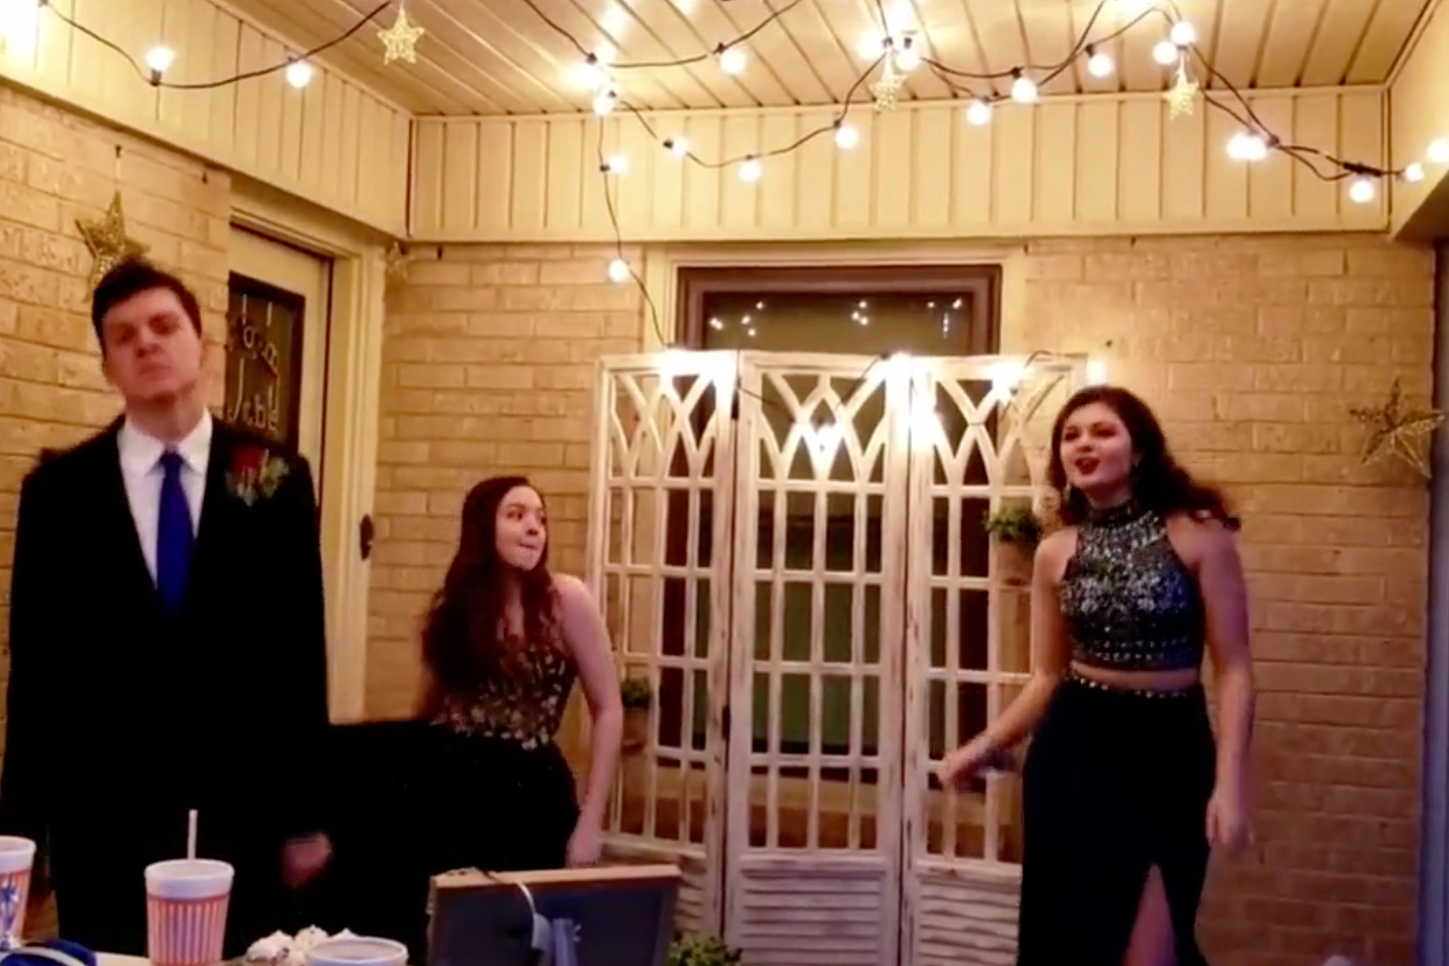 Family hosts 'porch prom' for high school senior after dance is cancelled because coronavirus (Jaci Chapman)